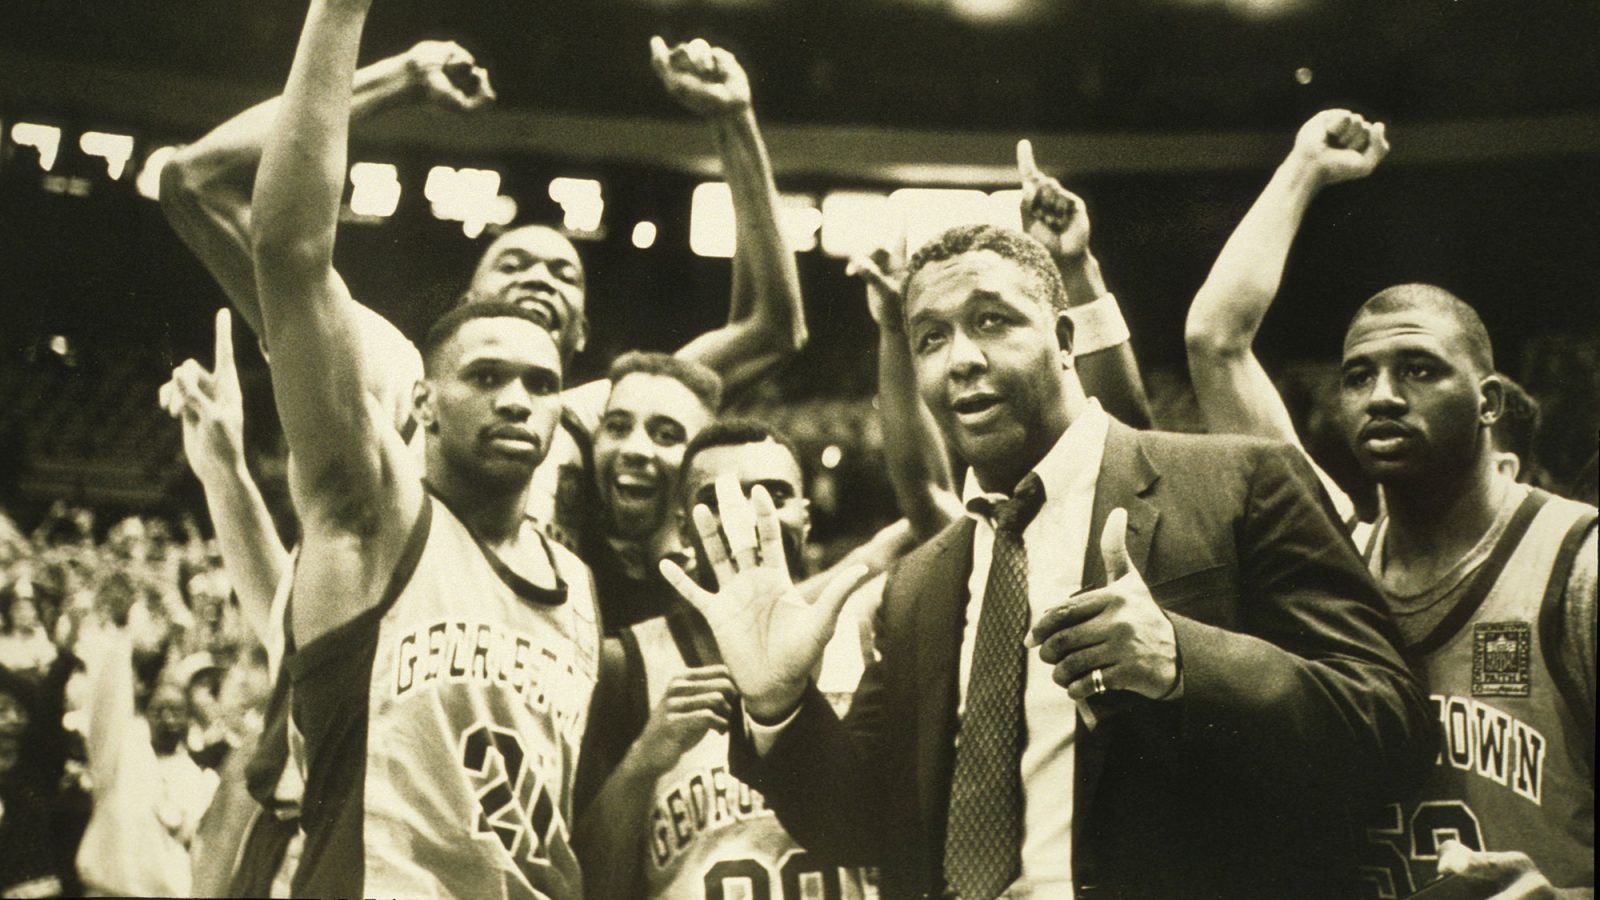 Coach John Thompson Jr. holds up his right palm and left thumb in front of Georgetown basketball players raising their arms in celebration in a faded photo